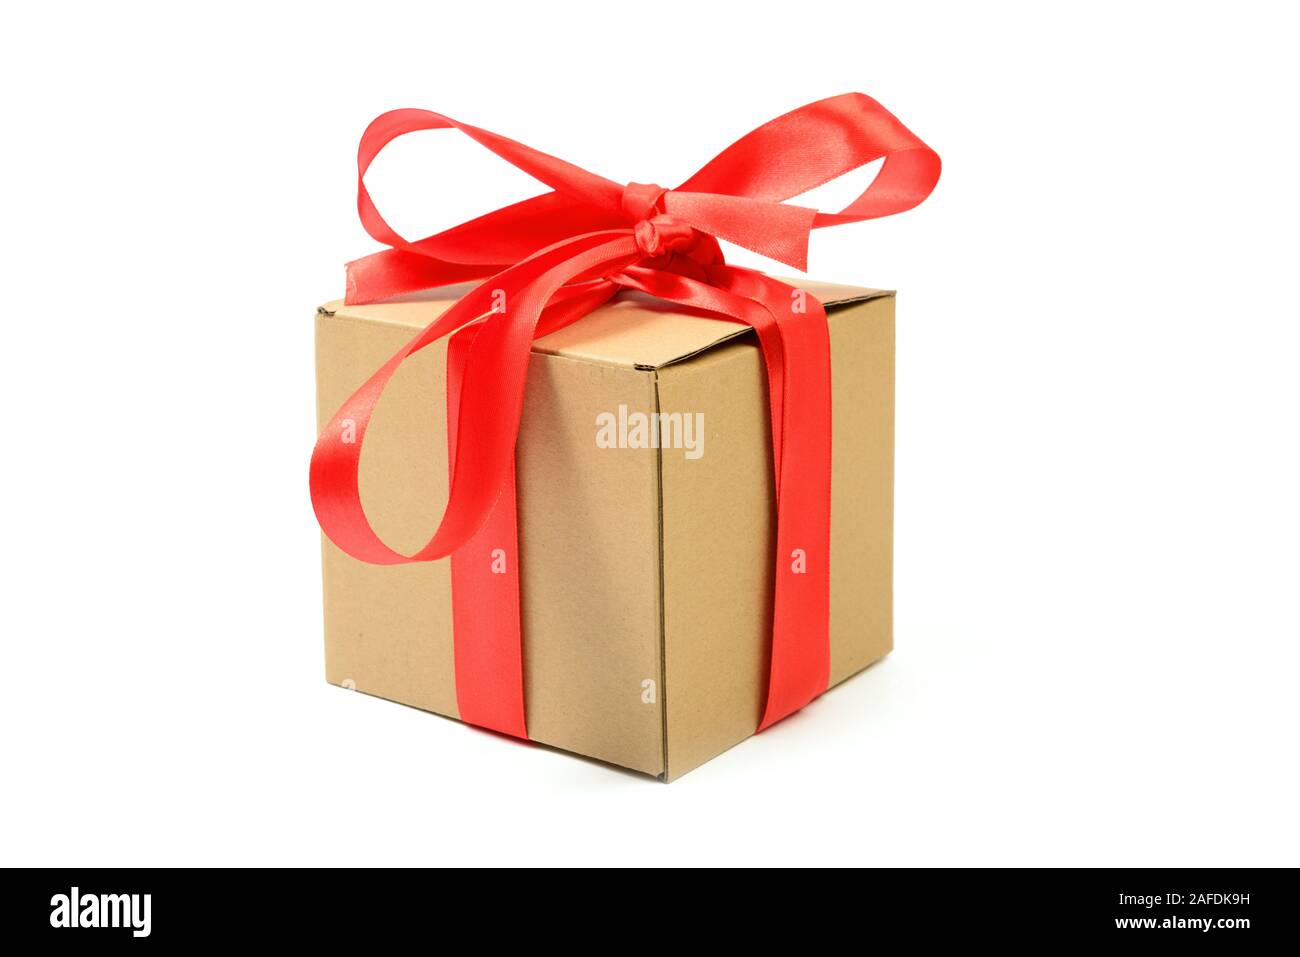 Cardboard gift box with red ribbon bow isolated on white Stock Photo